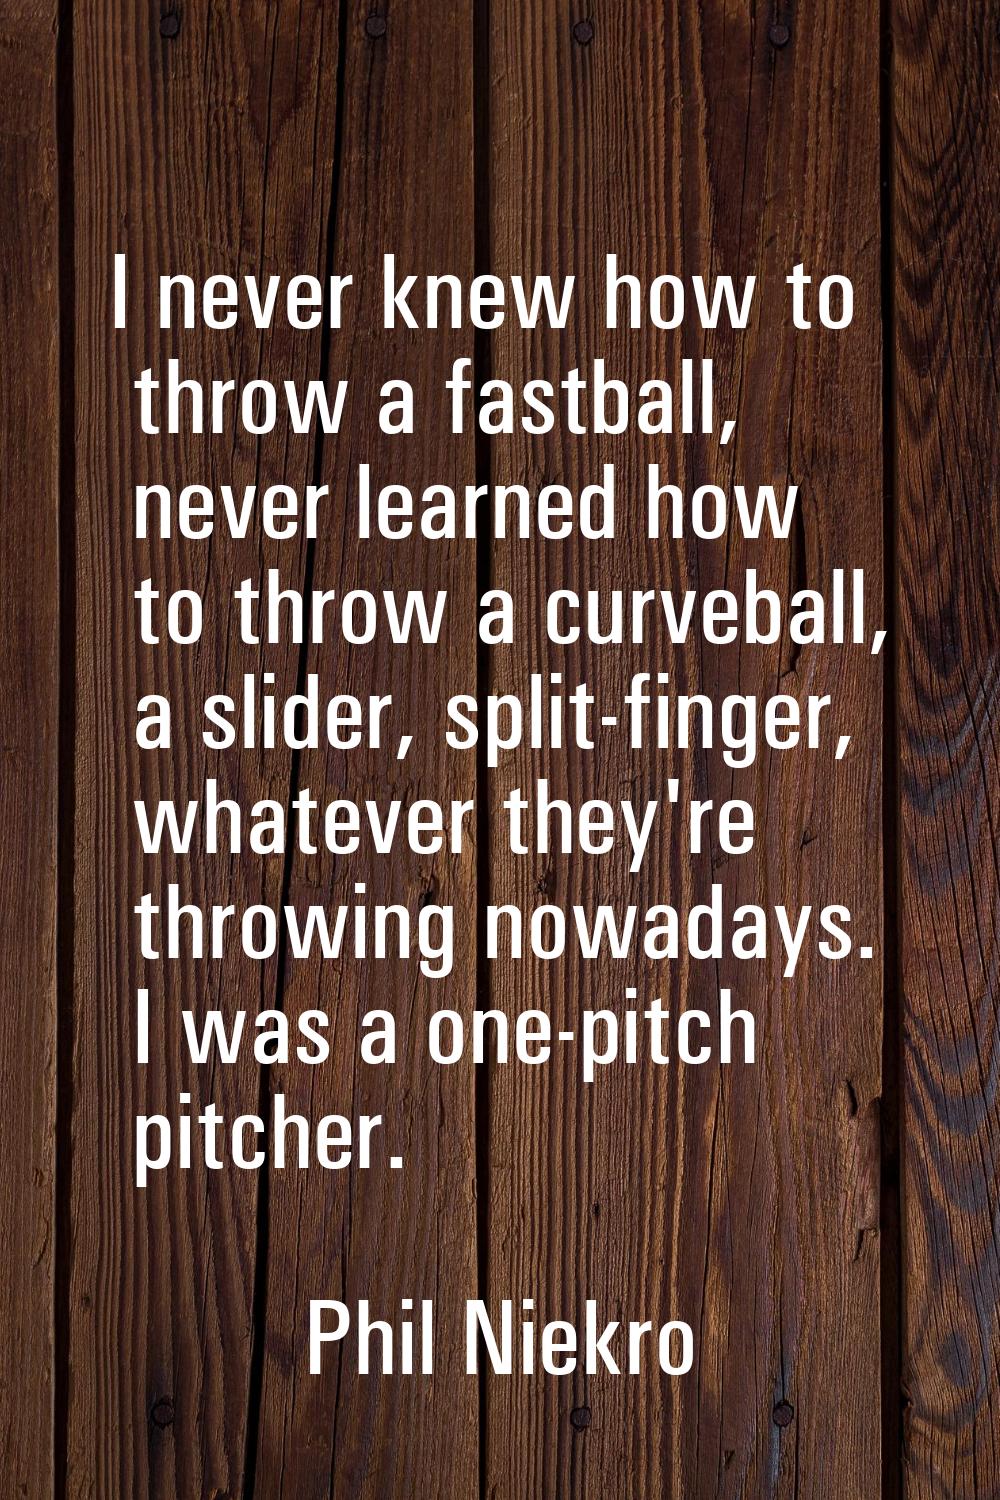 I never knew how to throw a fastball, never learned how to throw a curveball, a slider, split-finge